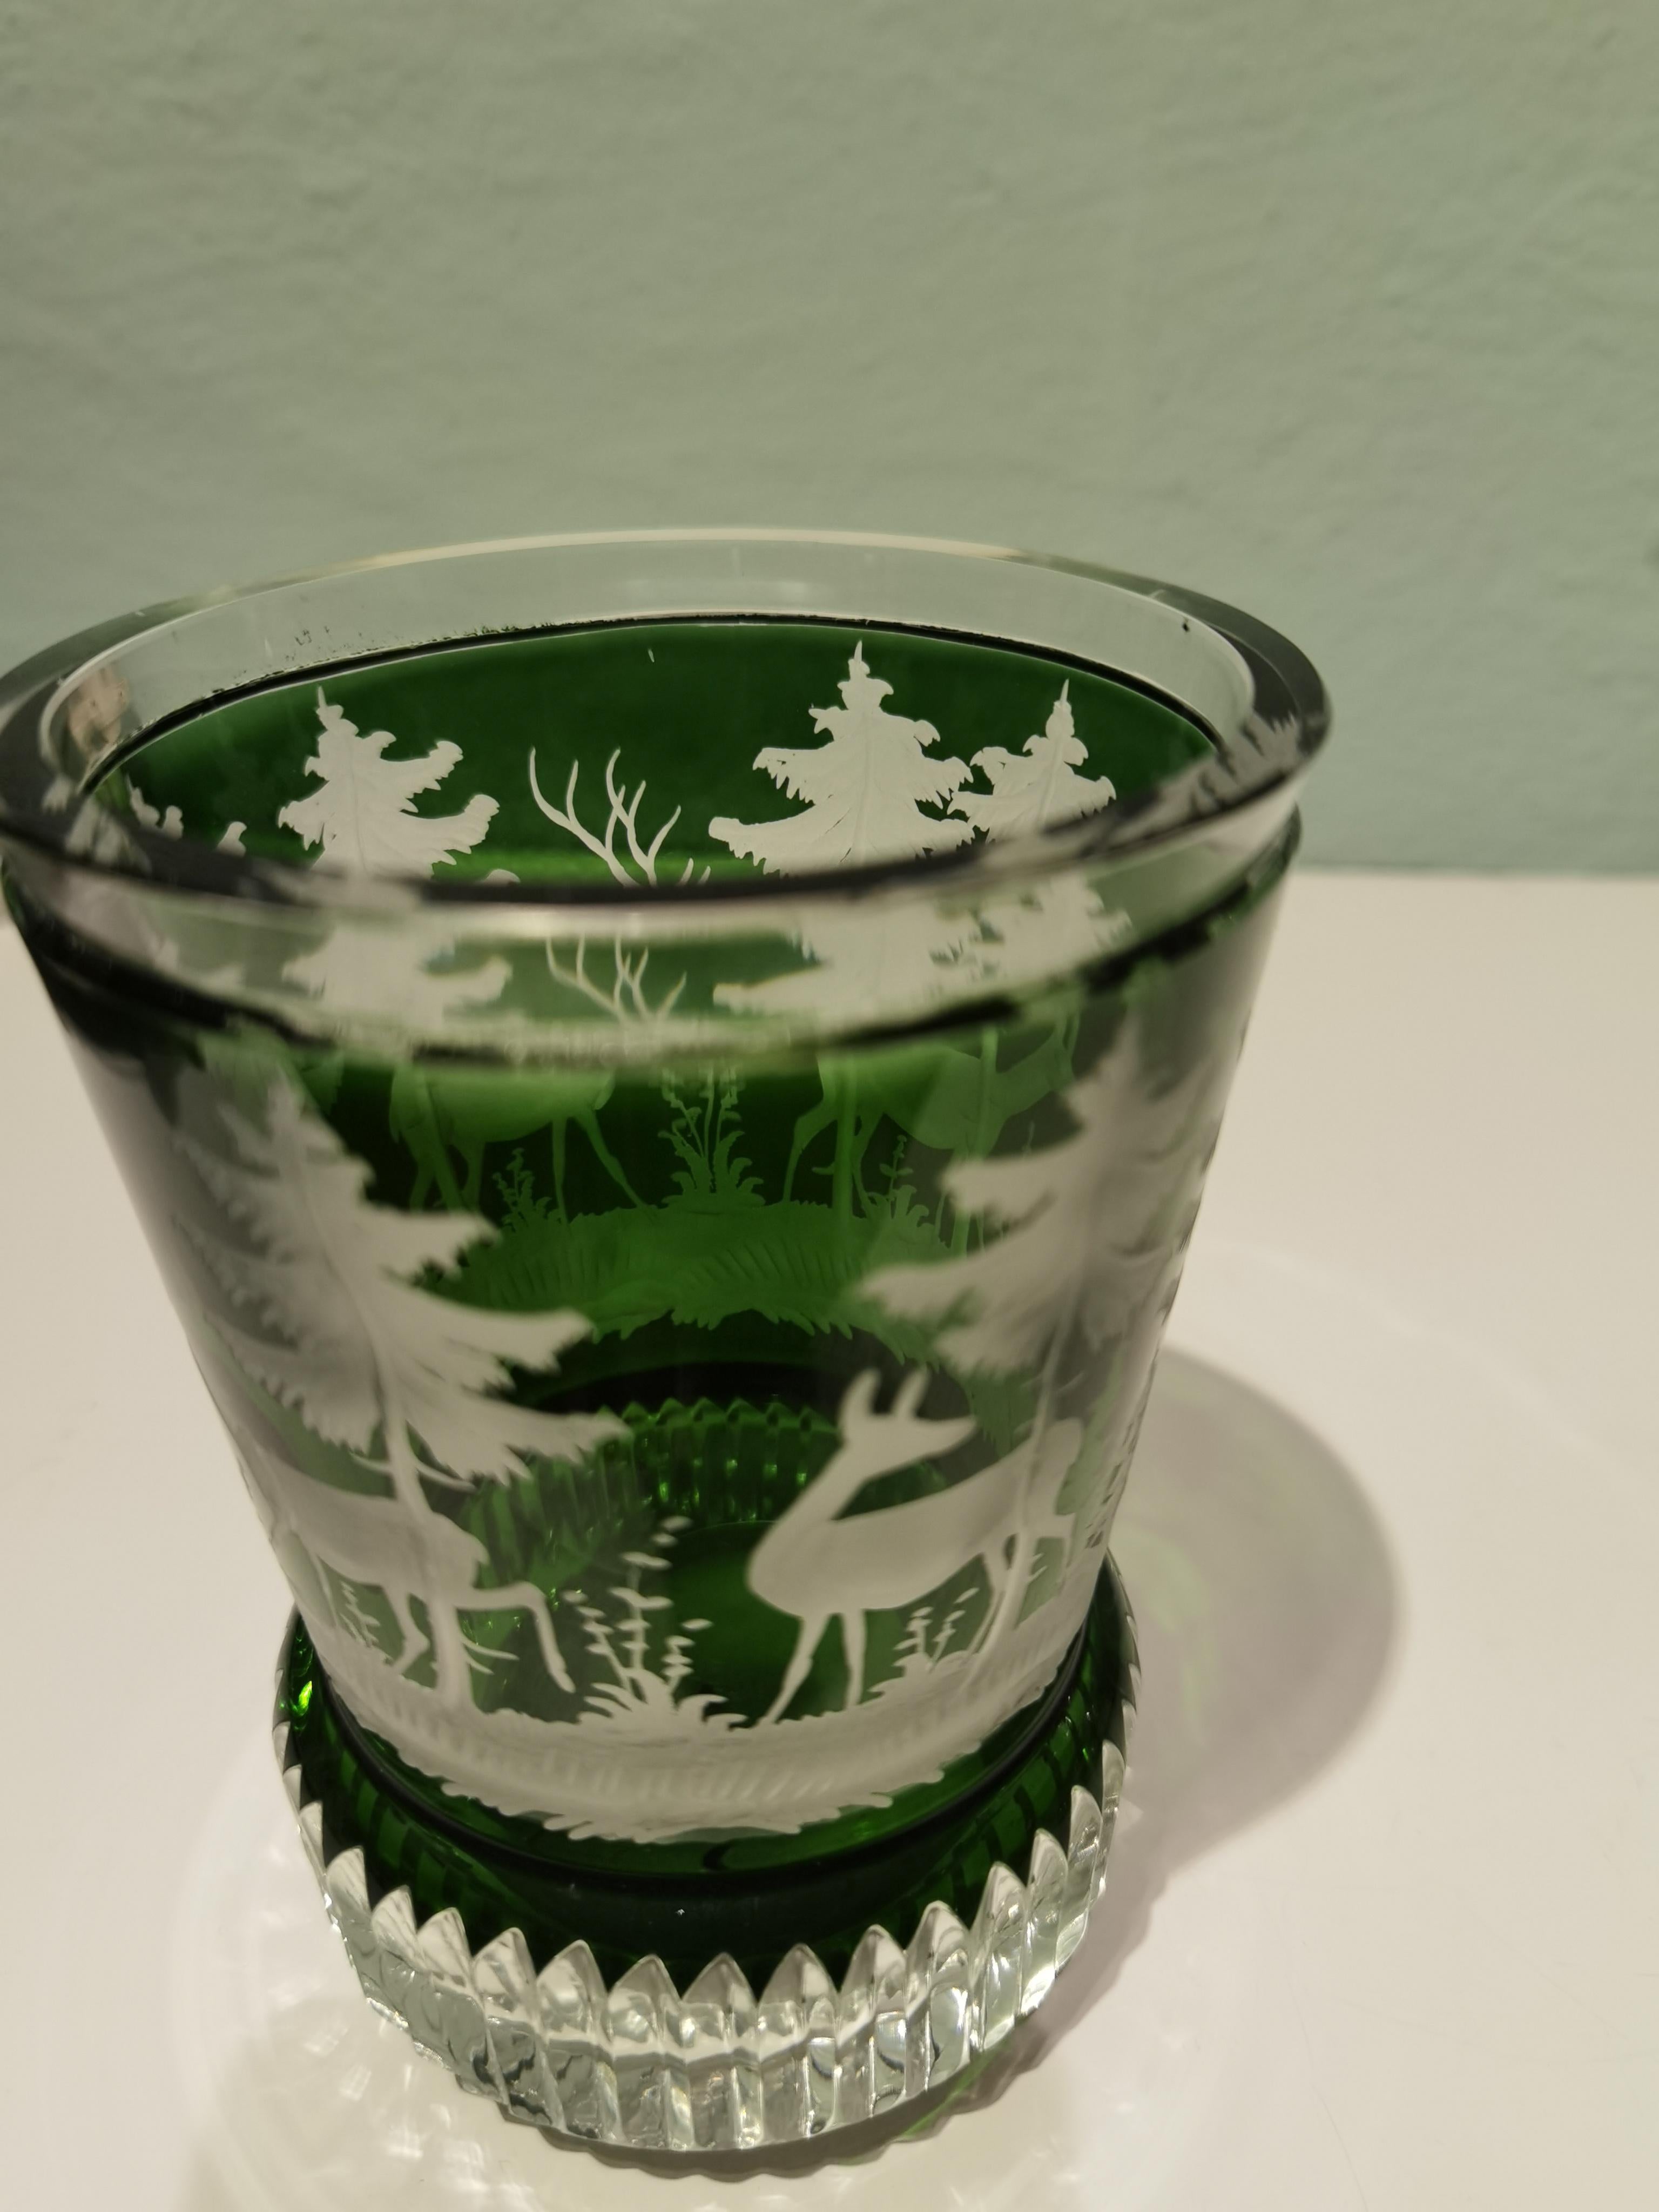 Hand blown crystal latern in green glass from Bavaria. The decor is hand blown and hands-free engraved by glass artists all around with a hunting scene with trees all around in the style of Black Forest. Sofina glass and porcelain was found 2013 in